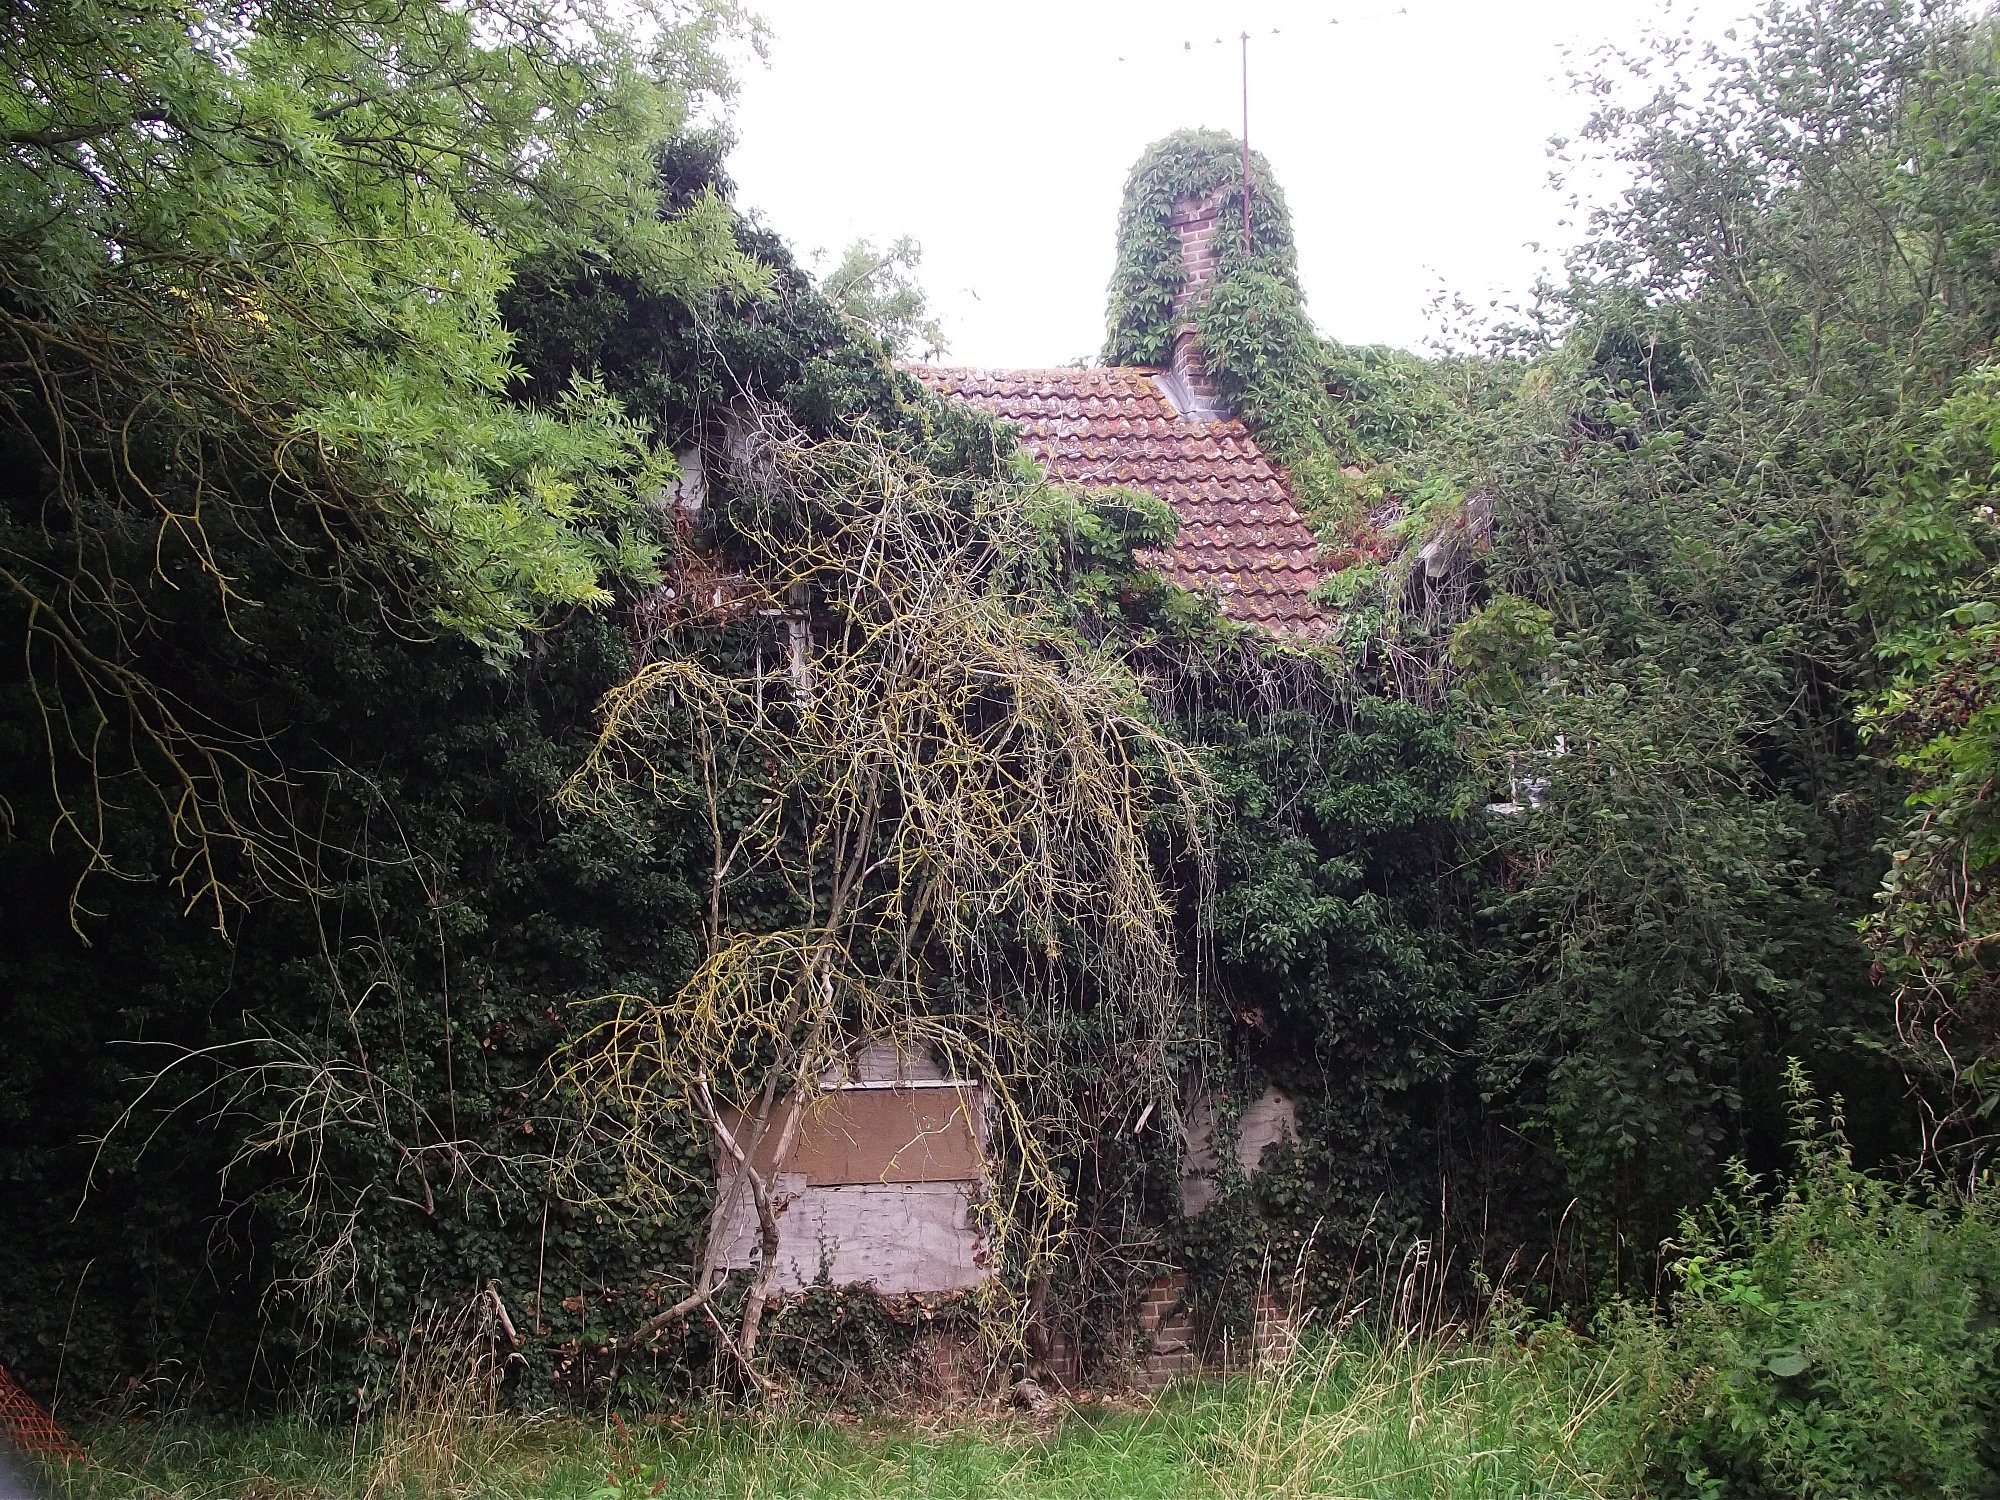 Entirely overgrown house – Derelict Cambridge, photographs and history